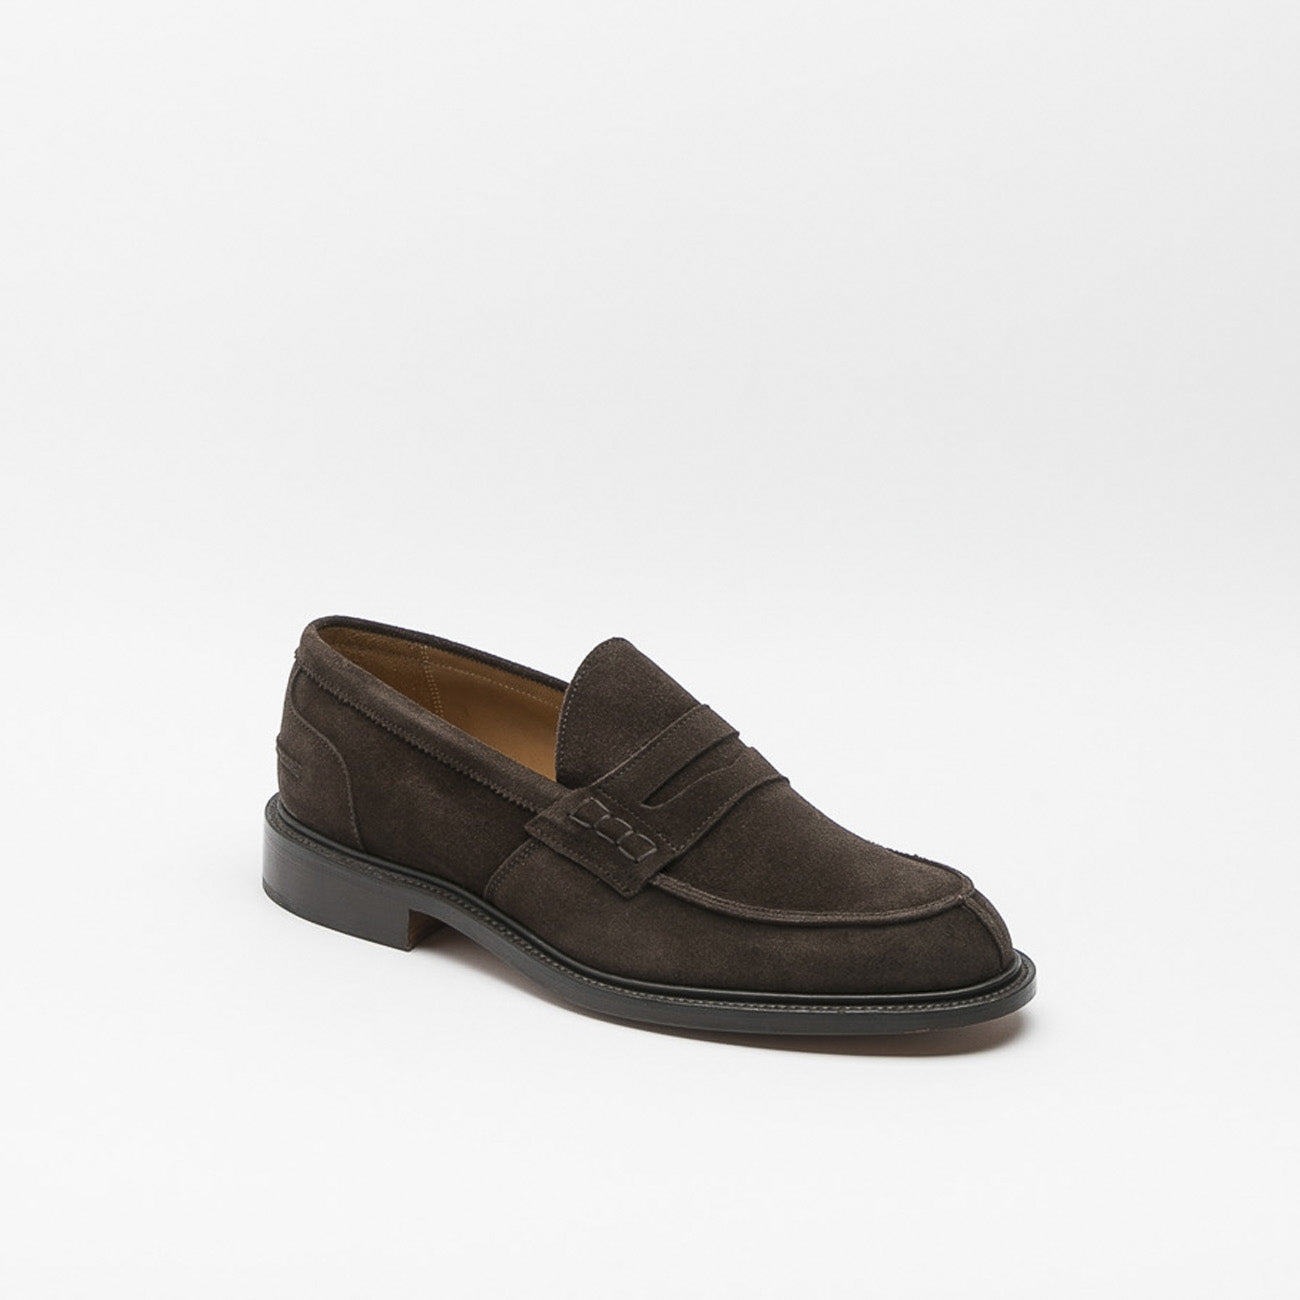 Tricker's James coffee castorino suede penny loafer